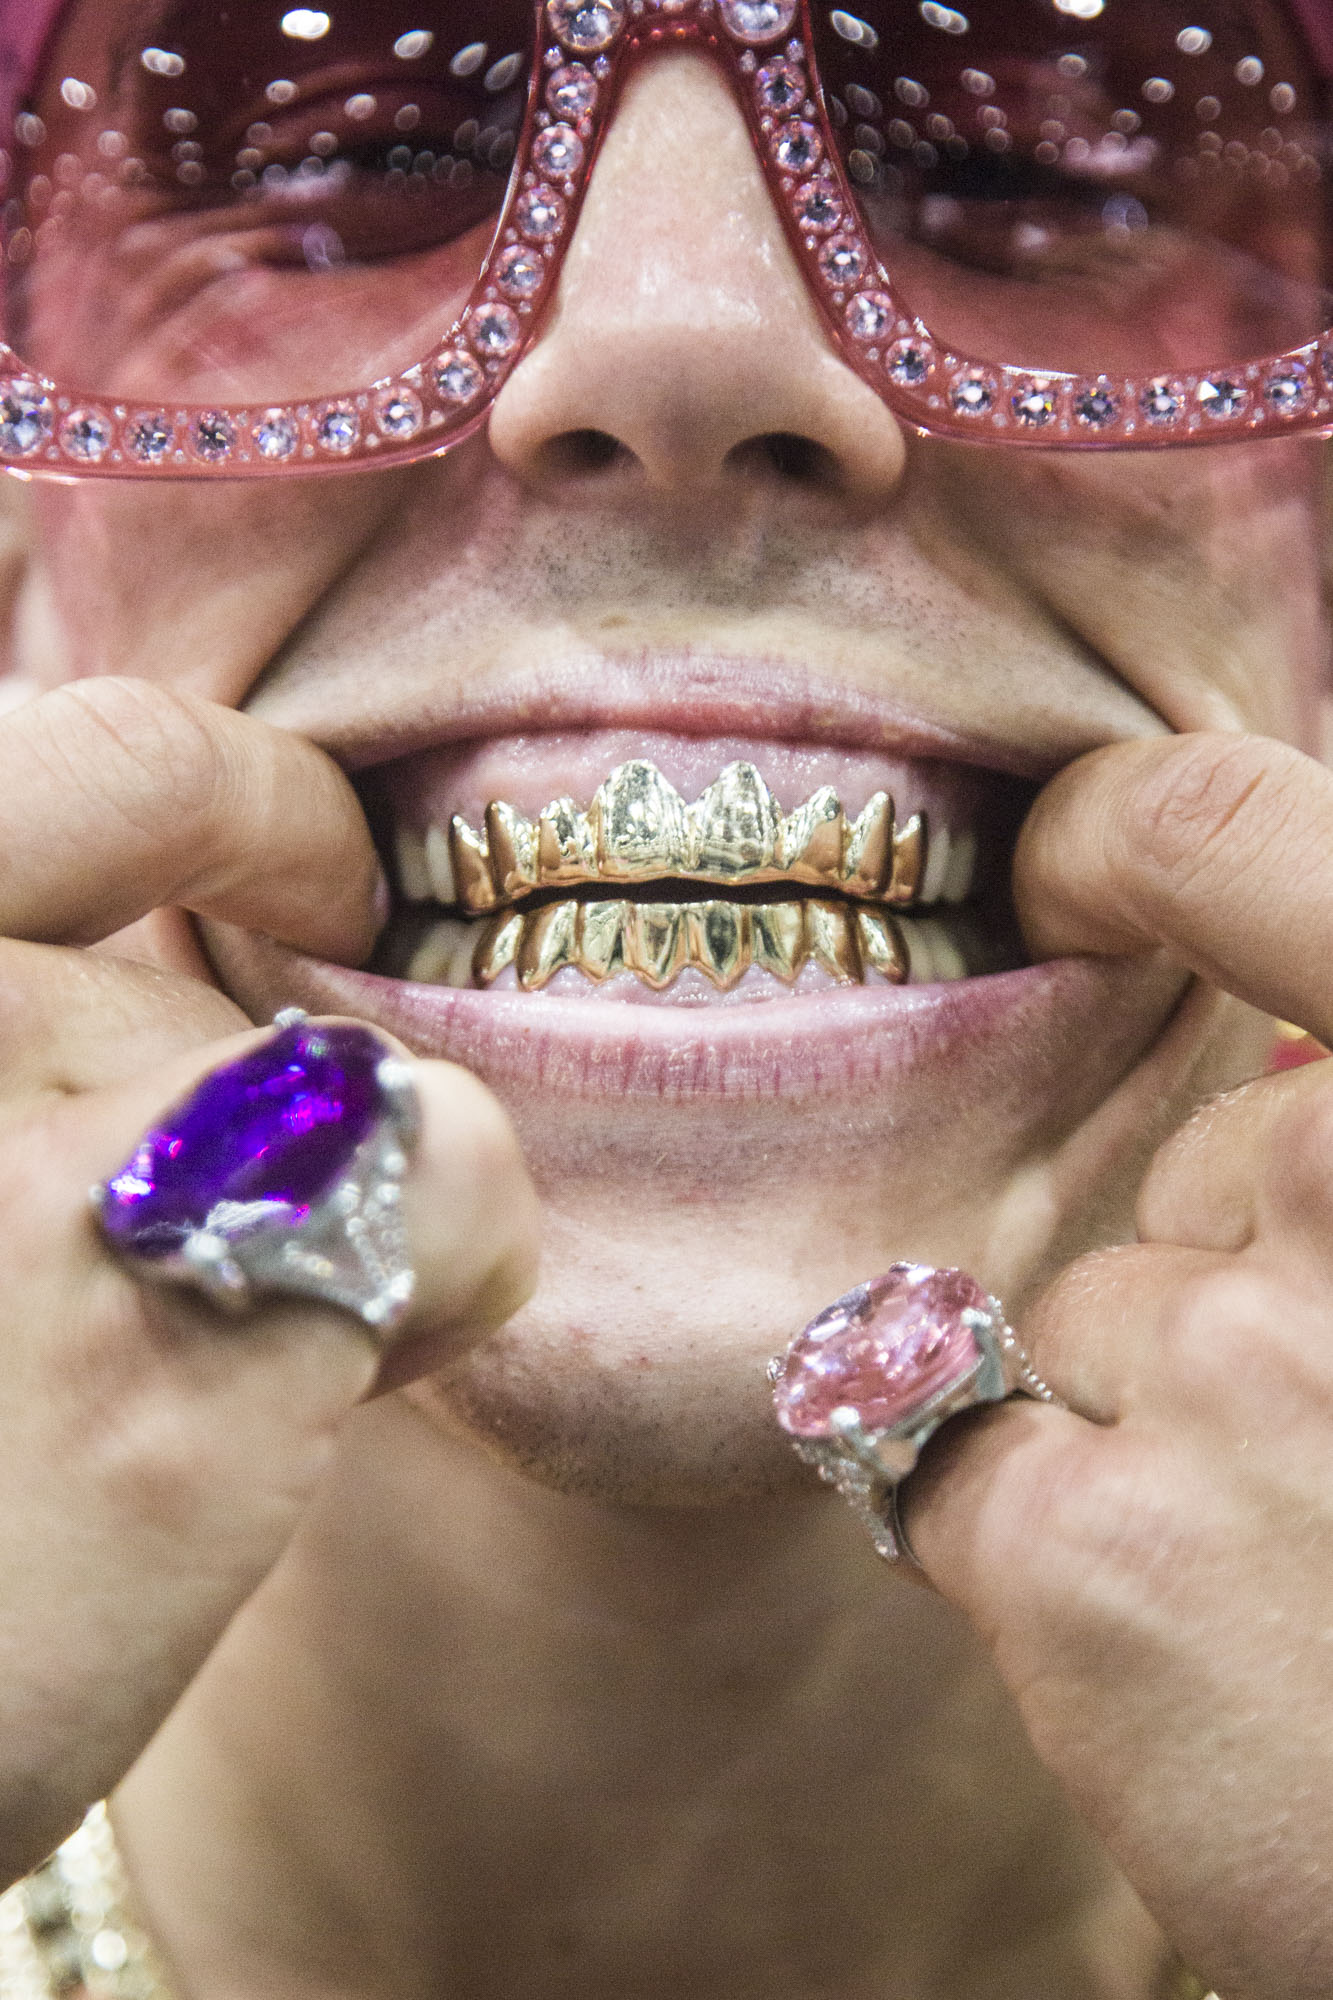  Candy Ken shows off his grills during RuPaul's DragCon LA in Los Angeles, Calif. on May 12, 2018.  